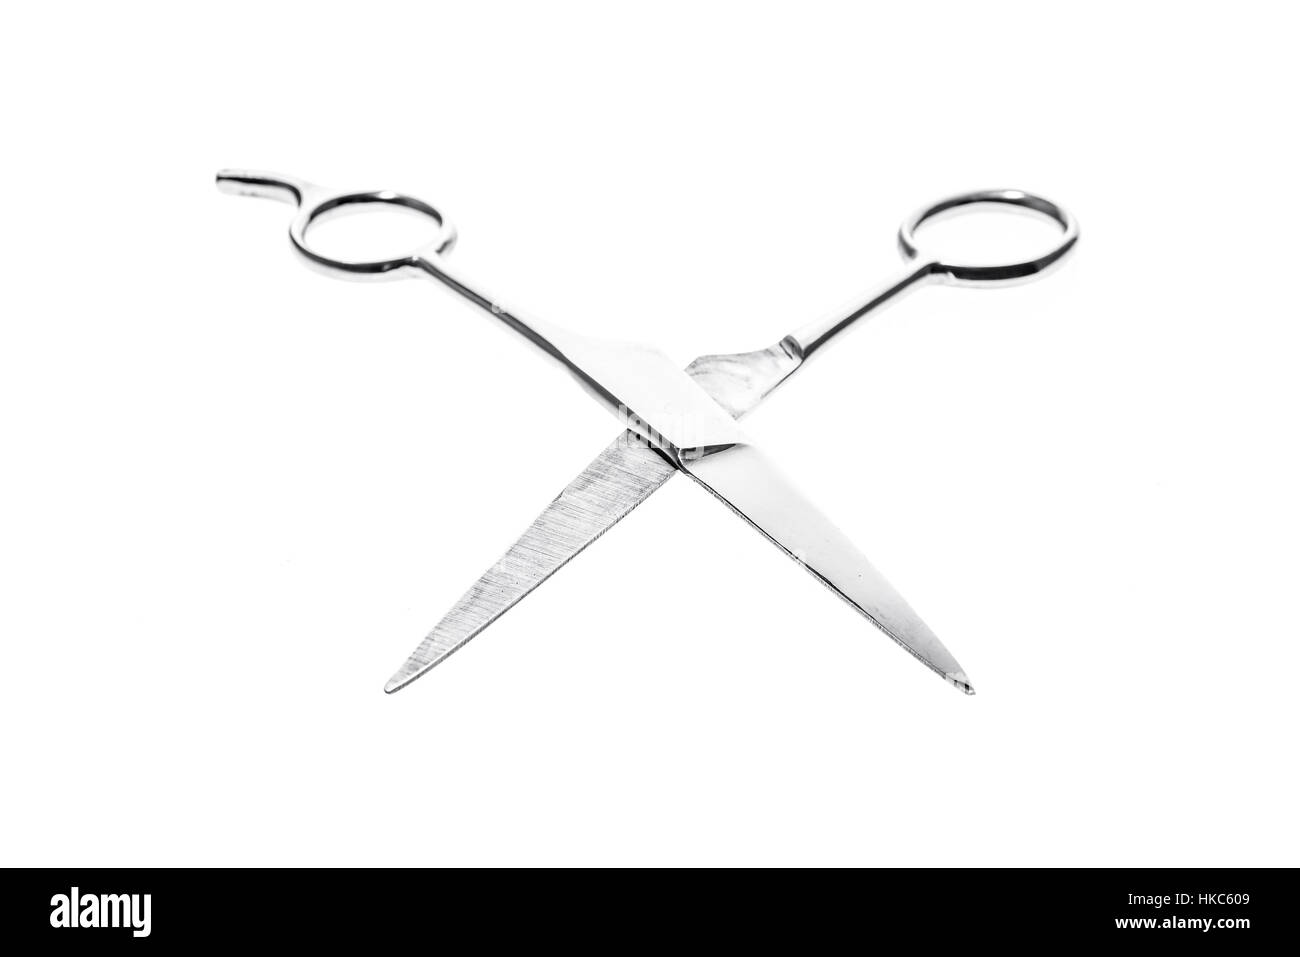 Hairdresser or barber silver professional scissors for cutting hair. Isolated on white background Stock Photo